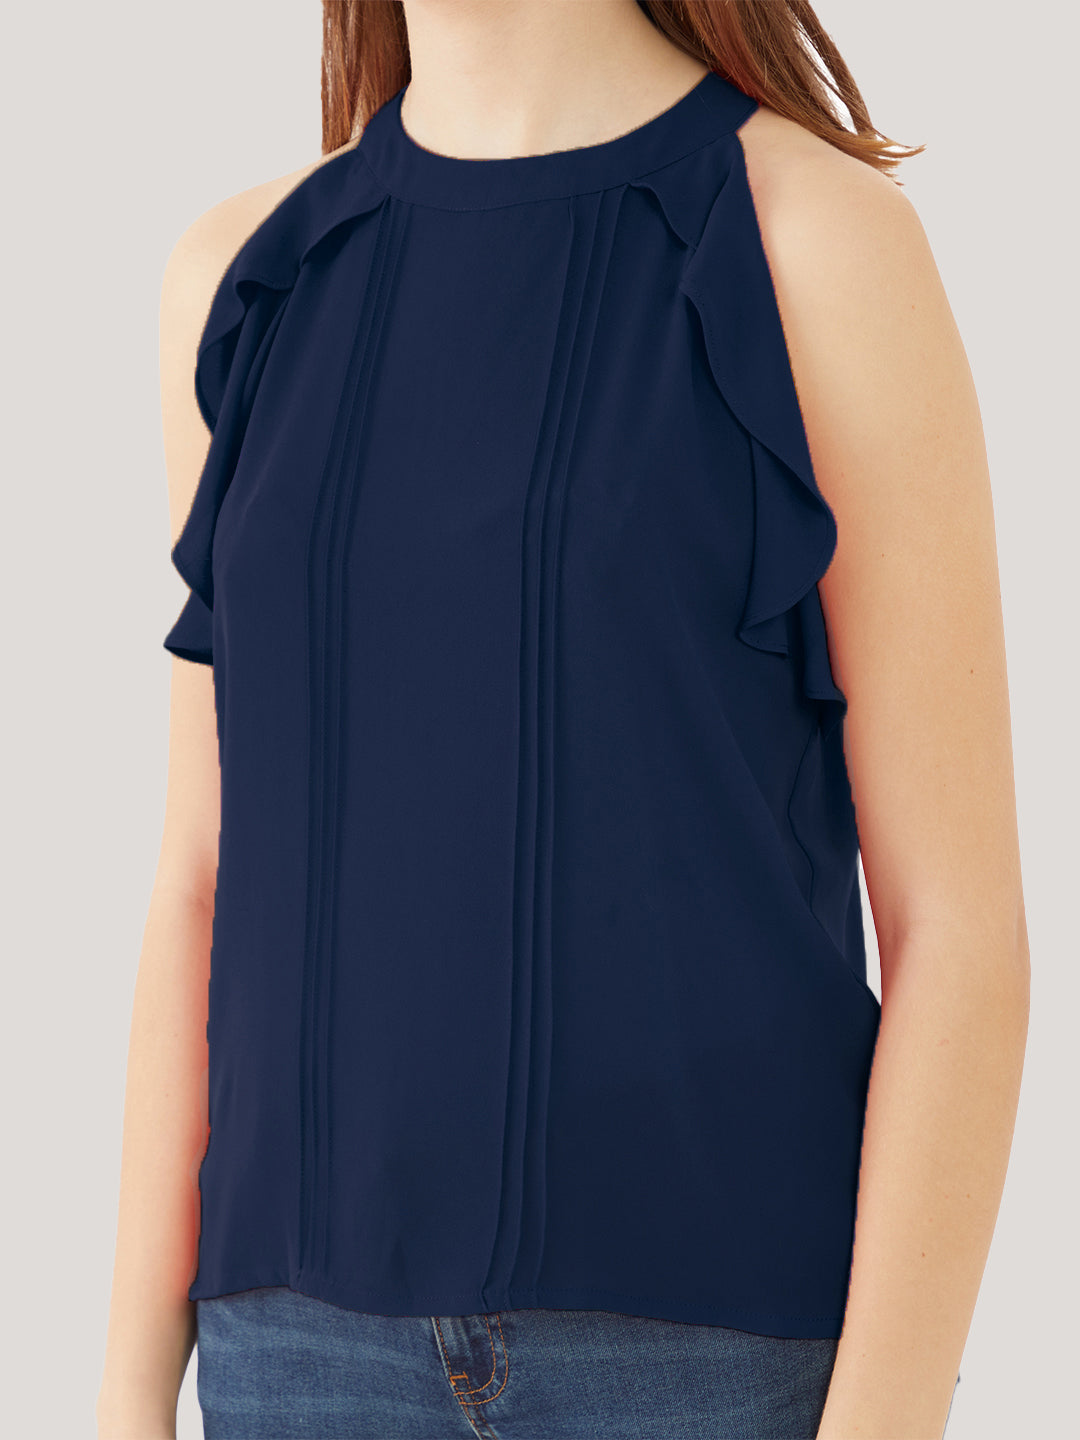 Navy-Blue-Solid-Ruffled-Top-for-Women-VT02364_106-Navy-6